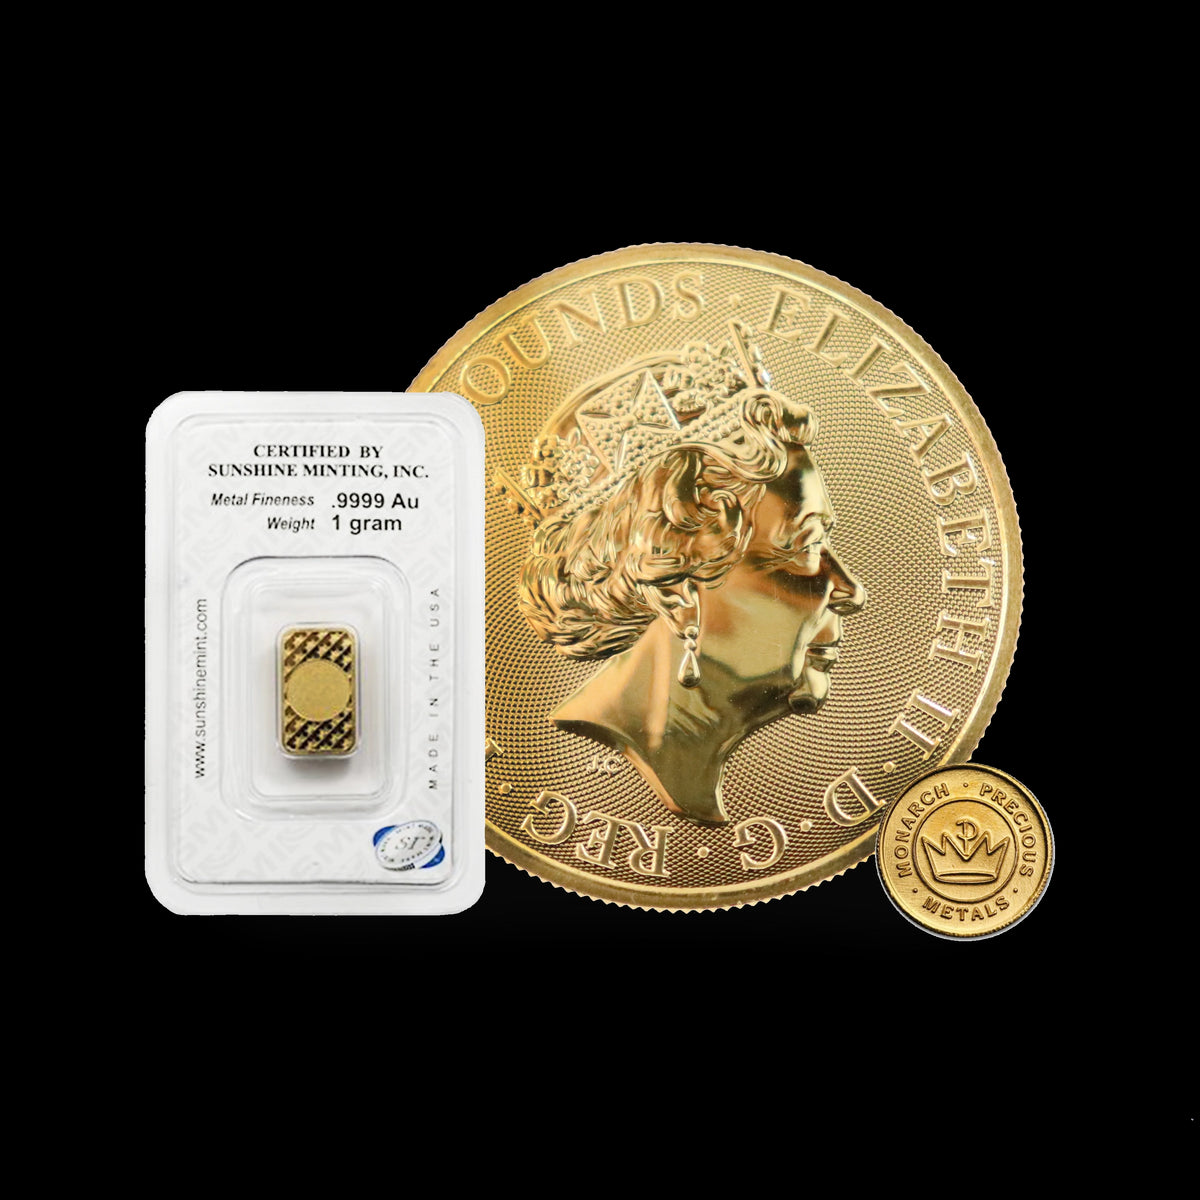 Buy gold and silver bars and coins online. Low prices, fast delivery.